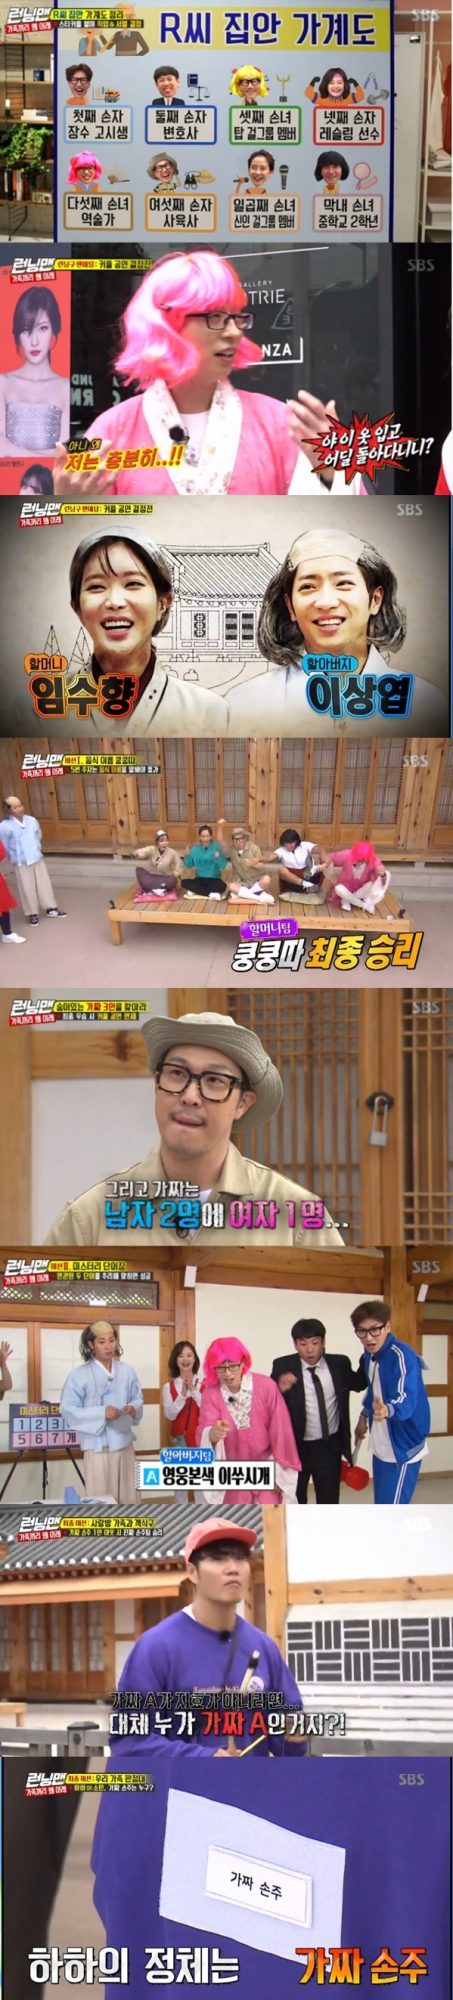 <p>Yoo Jae-Suk and HaHa is SBS ‘Running Man’9 anniversary Love Without Love (Live at Summer Vacation/08 from couple stage to me.</p><p>Viewership survey Agency Nielsen Korea, according to the last 26 broadcast of ‘Running Man’per minute, with a maximum application rate of 7. 9%soared, and the main the advertising relationships of important indicator 2049 target viewership in 3. 1%(NCR furniture viewership Part 2 standard)record for the same time period, 1 ranked. Average viewership is part 1 of 4. 9%, Part 2 6. 6%(NCR furniture viewership standards)was.</p><p>This day in the broadcast ahead of ‘Running Man’ 9th anniversary special project ‘Running Man Love Without Love (Live at Summer Vacation/08 – running research project’ the second story decorated. Last week the broadcasting project in the first public and collective dance and were members of the first couple performances of the two ‘fake hand find’ Race, stepped forward.</p><p>This time Race in the real hand and the final hand that fake 3 you know you have to Race to win, and fake 3s grandchildren only out to win was done in a way. 8 of the members are cousins with the minutes. Learn any special effects and more of the Maple family of grandma, grandpa appeared to “our grandchildren are five, why not eight?”said authentic Race start.</p><p>Grandpa Tim and grandma as a team handing the mission proceeded, 1 car Mission ‘food names, stomp off’to Grandmas team a ‘fake Man 2 Woman 1’the hint was obtained. Since the mission through the options for this cute and special effect fake noticed that the fake grandchild to go to. This scene is per minute, with a maximum application rate of 7. 9%and the ‘best 1 minute’.</p><p>Eventually couple to couple stage performances as the decision was, adding 1 to the filmmaker as Yoo Jae-Suk is winning no two people are partner Love Without Love (Live at Summer Vacation/08 performances in.</p>